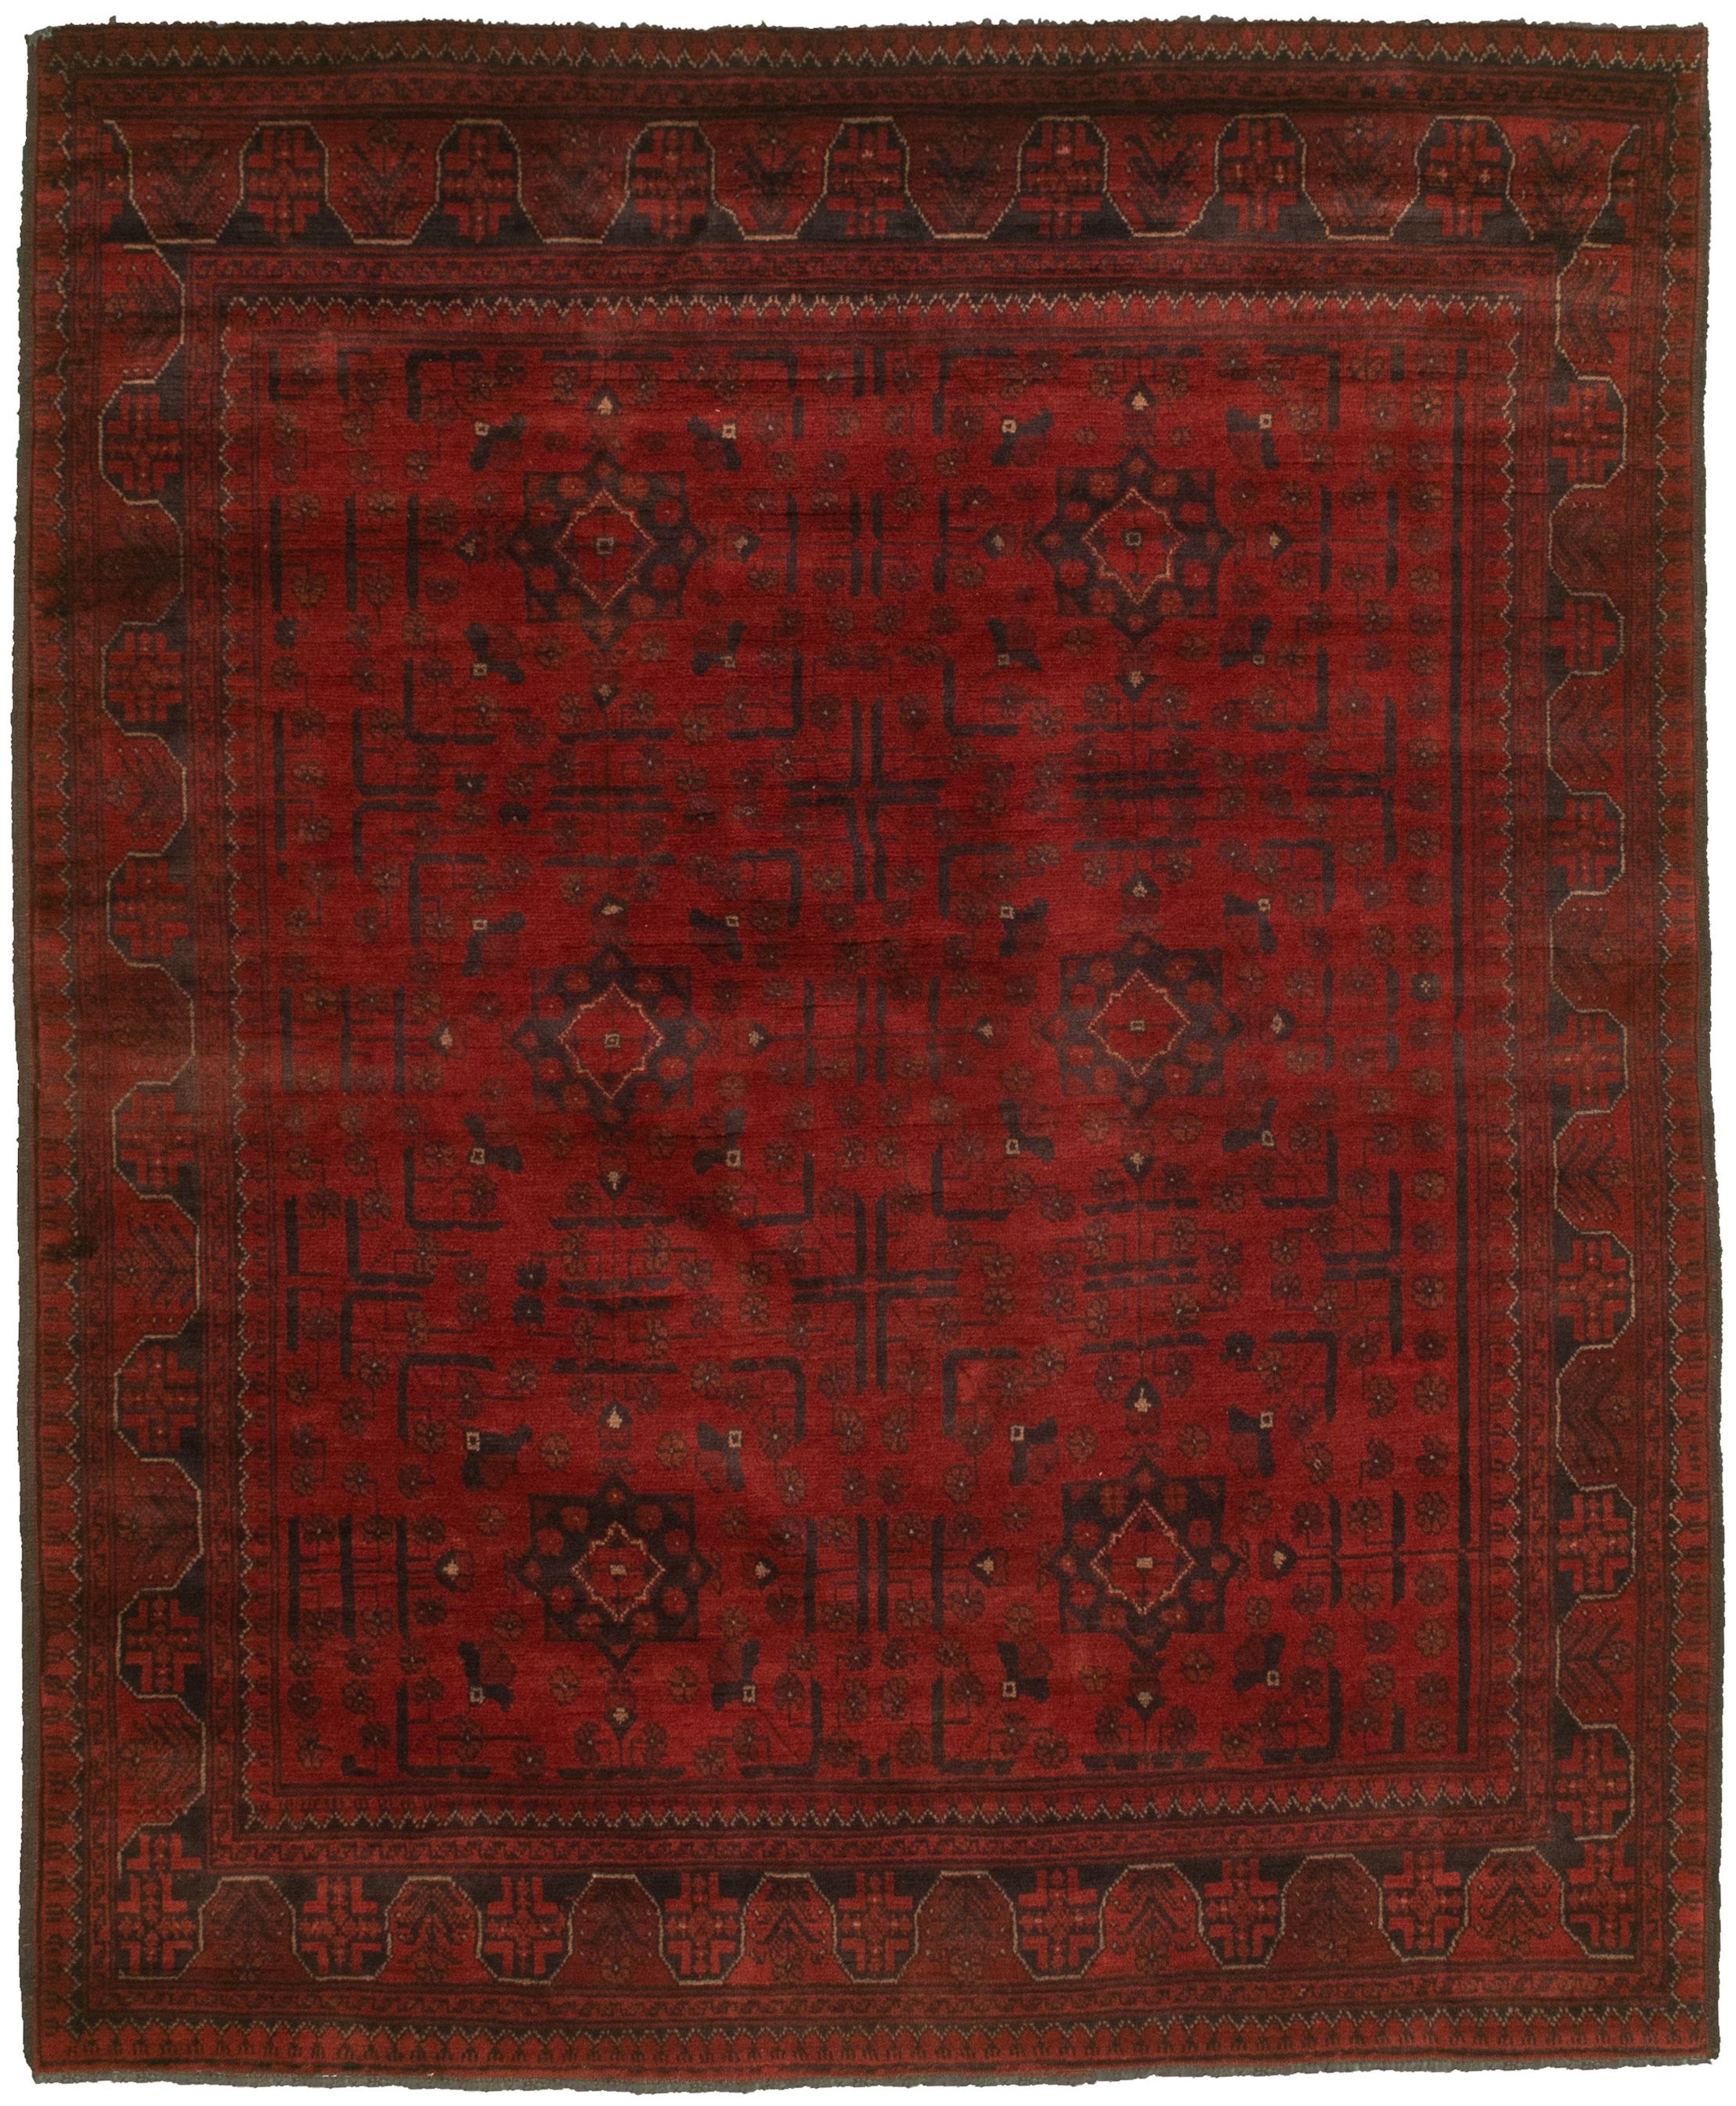 Hand-knotted Finest Khal Mohammadi Red  Rug 5'2" x 6'4"  Size: 5'2" x 6'4"  